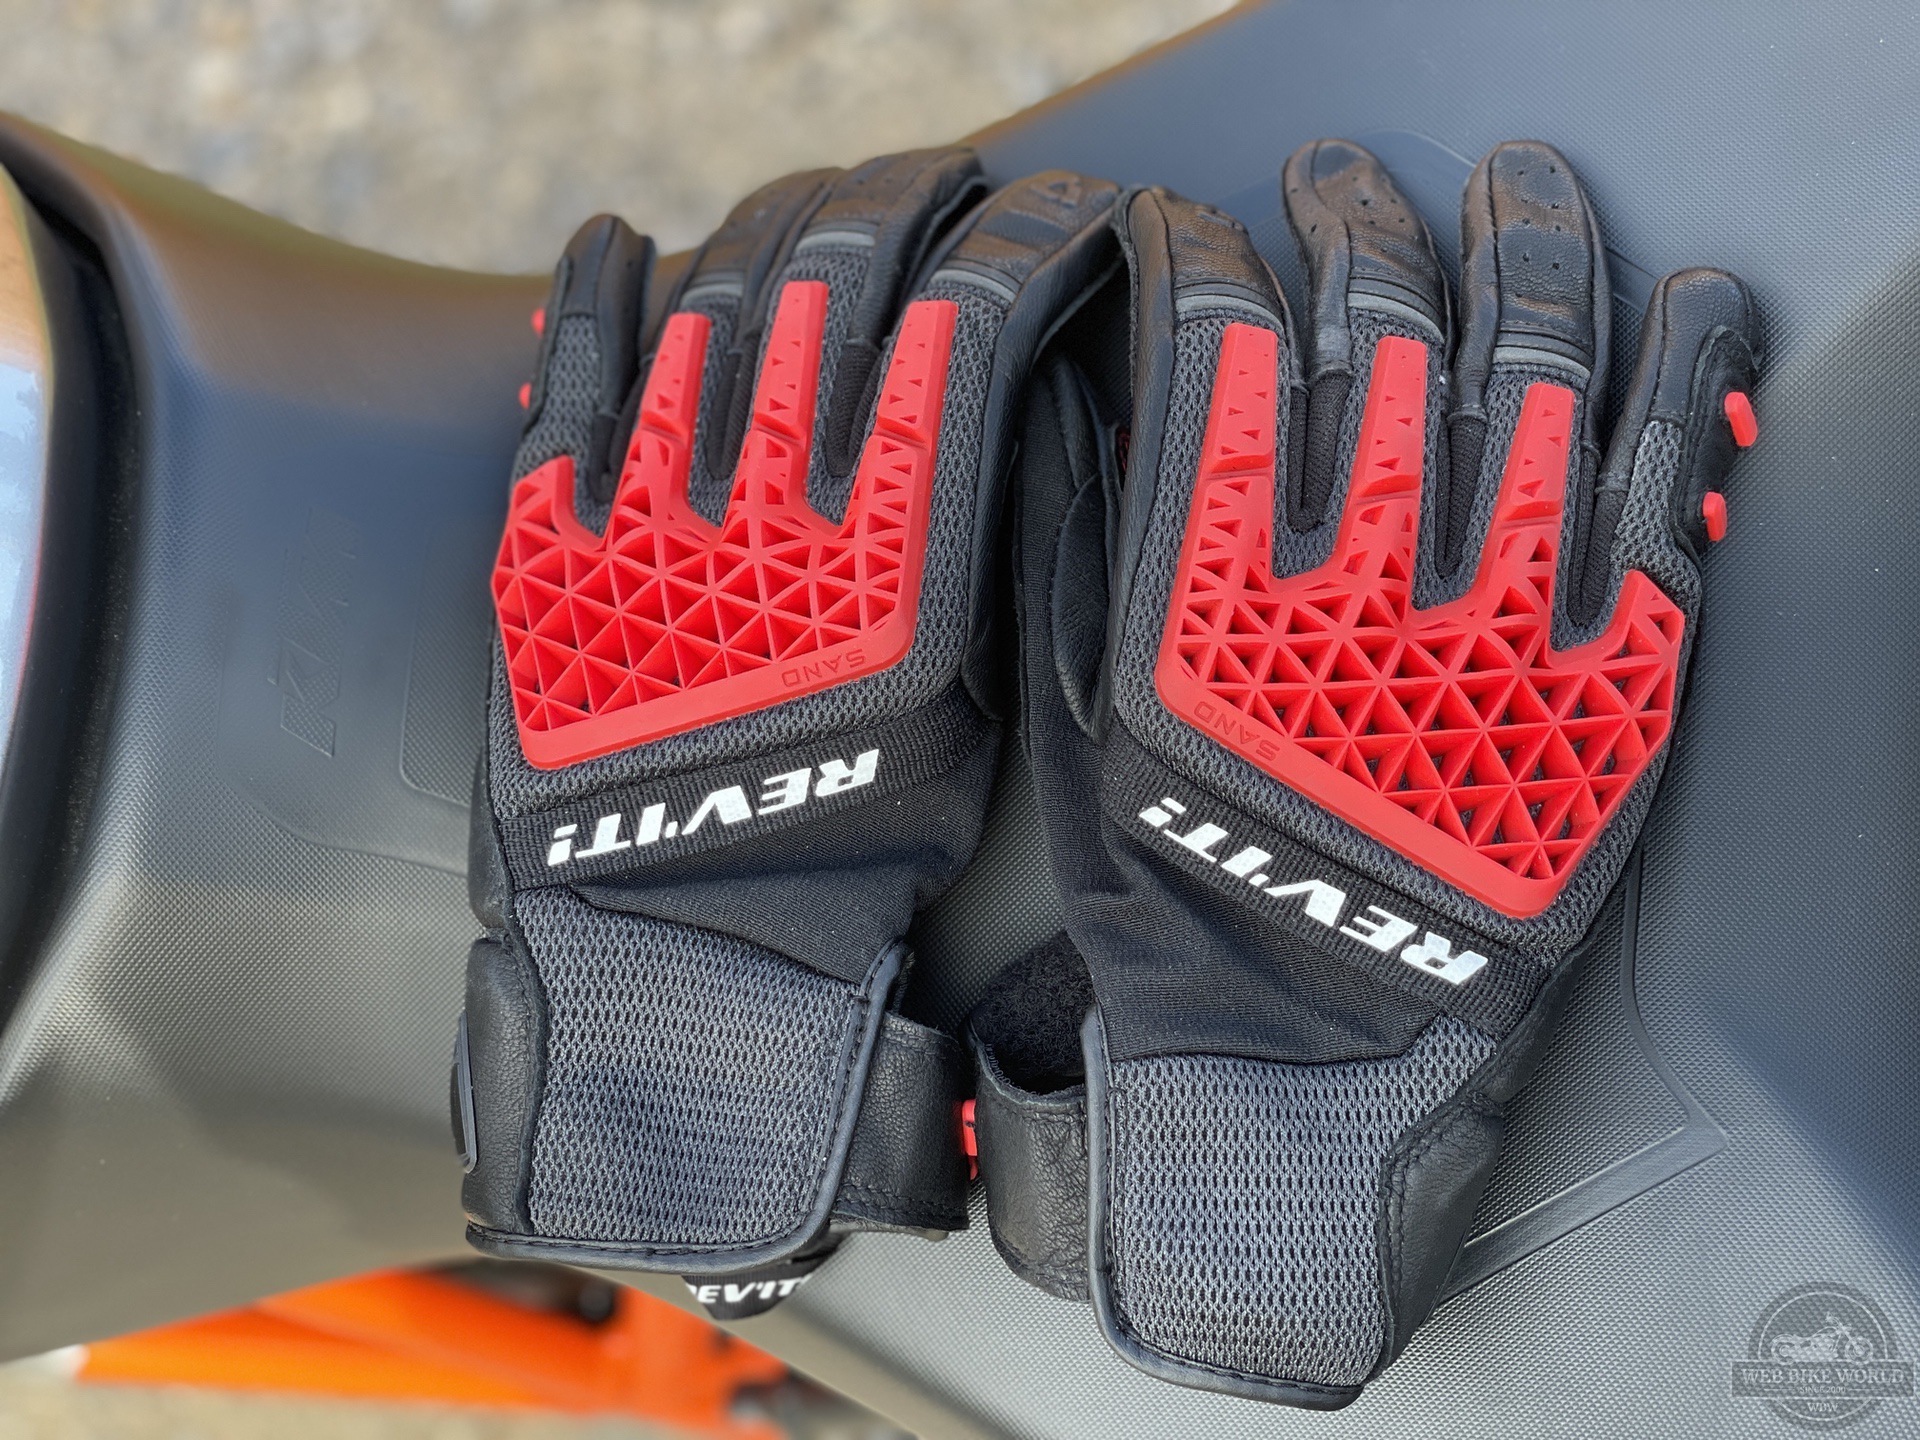 REV'IT Sand 4 Gloves in black and red lying next to each other on motorcycle seat